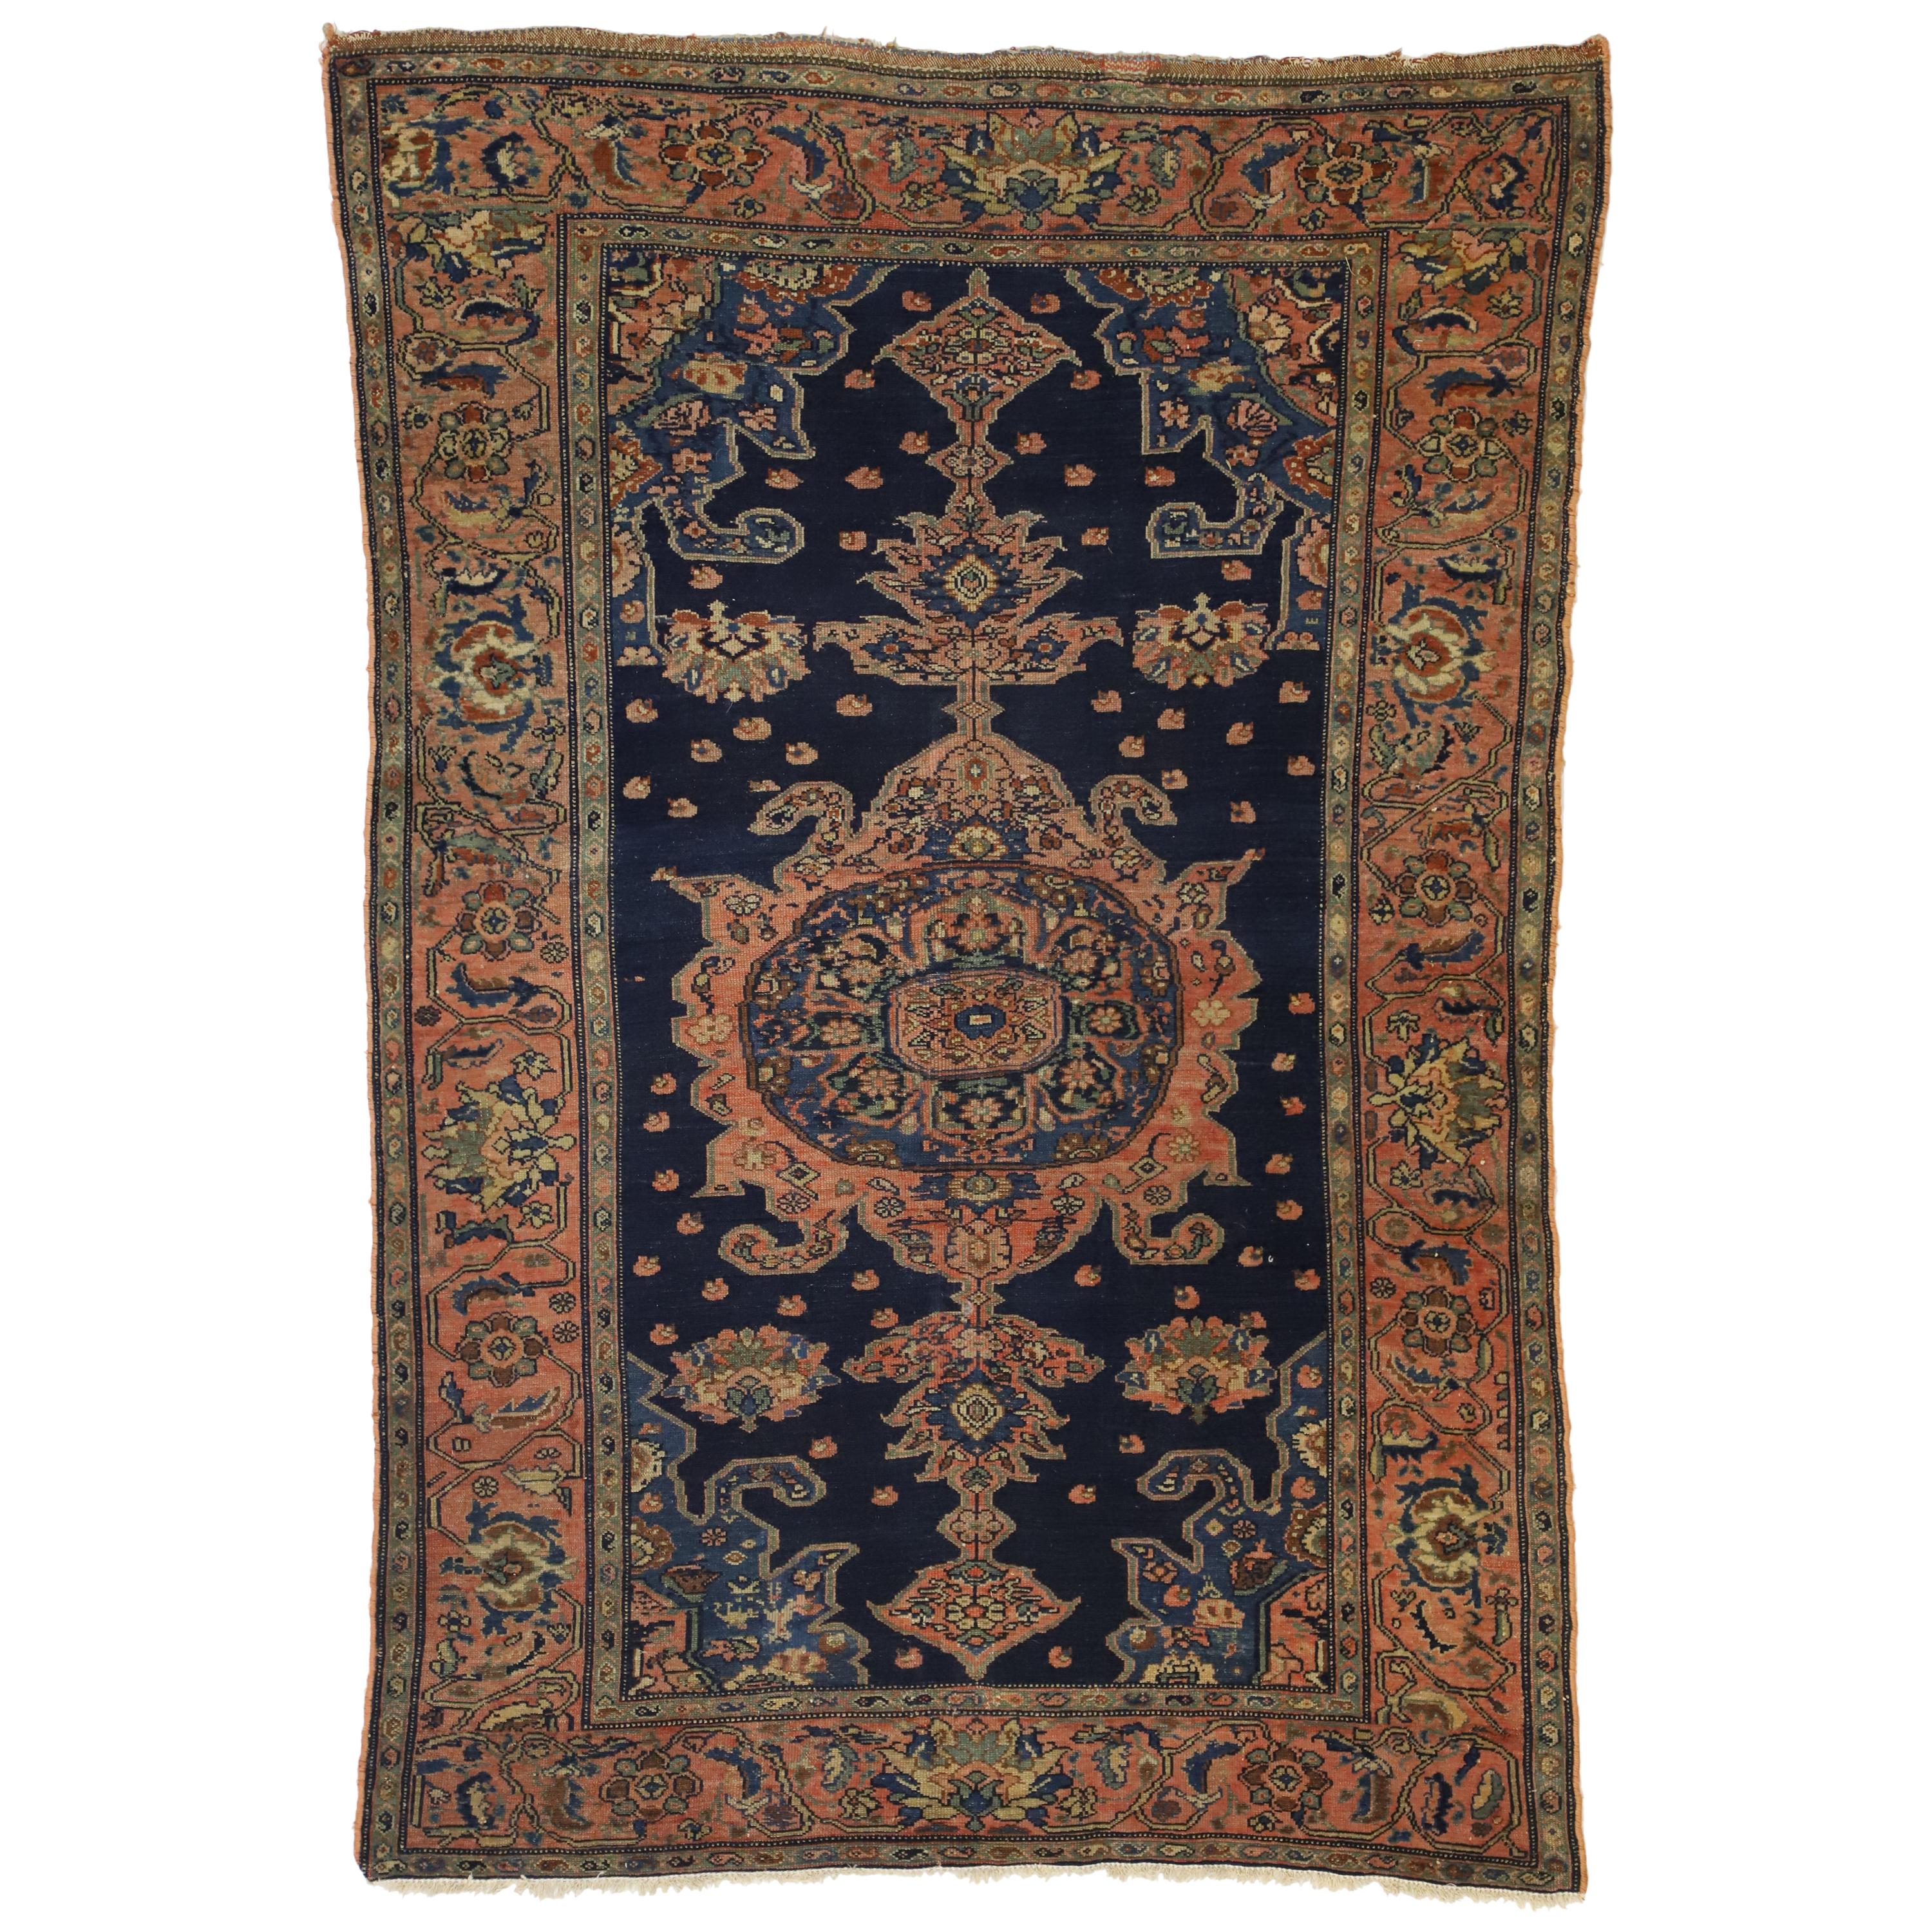 Antique Persian Malayer Rug for Entry, Kitchen, Foyer, or Bathroom